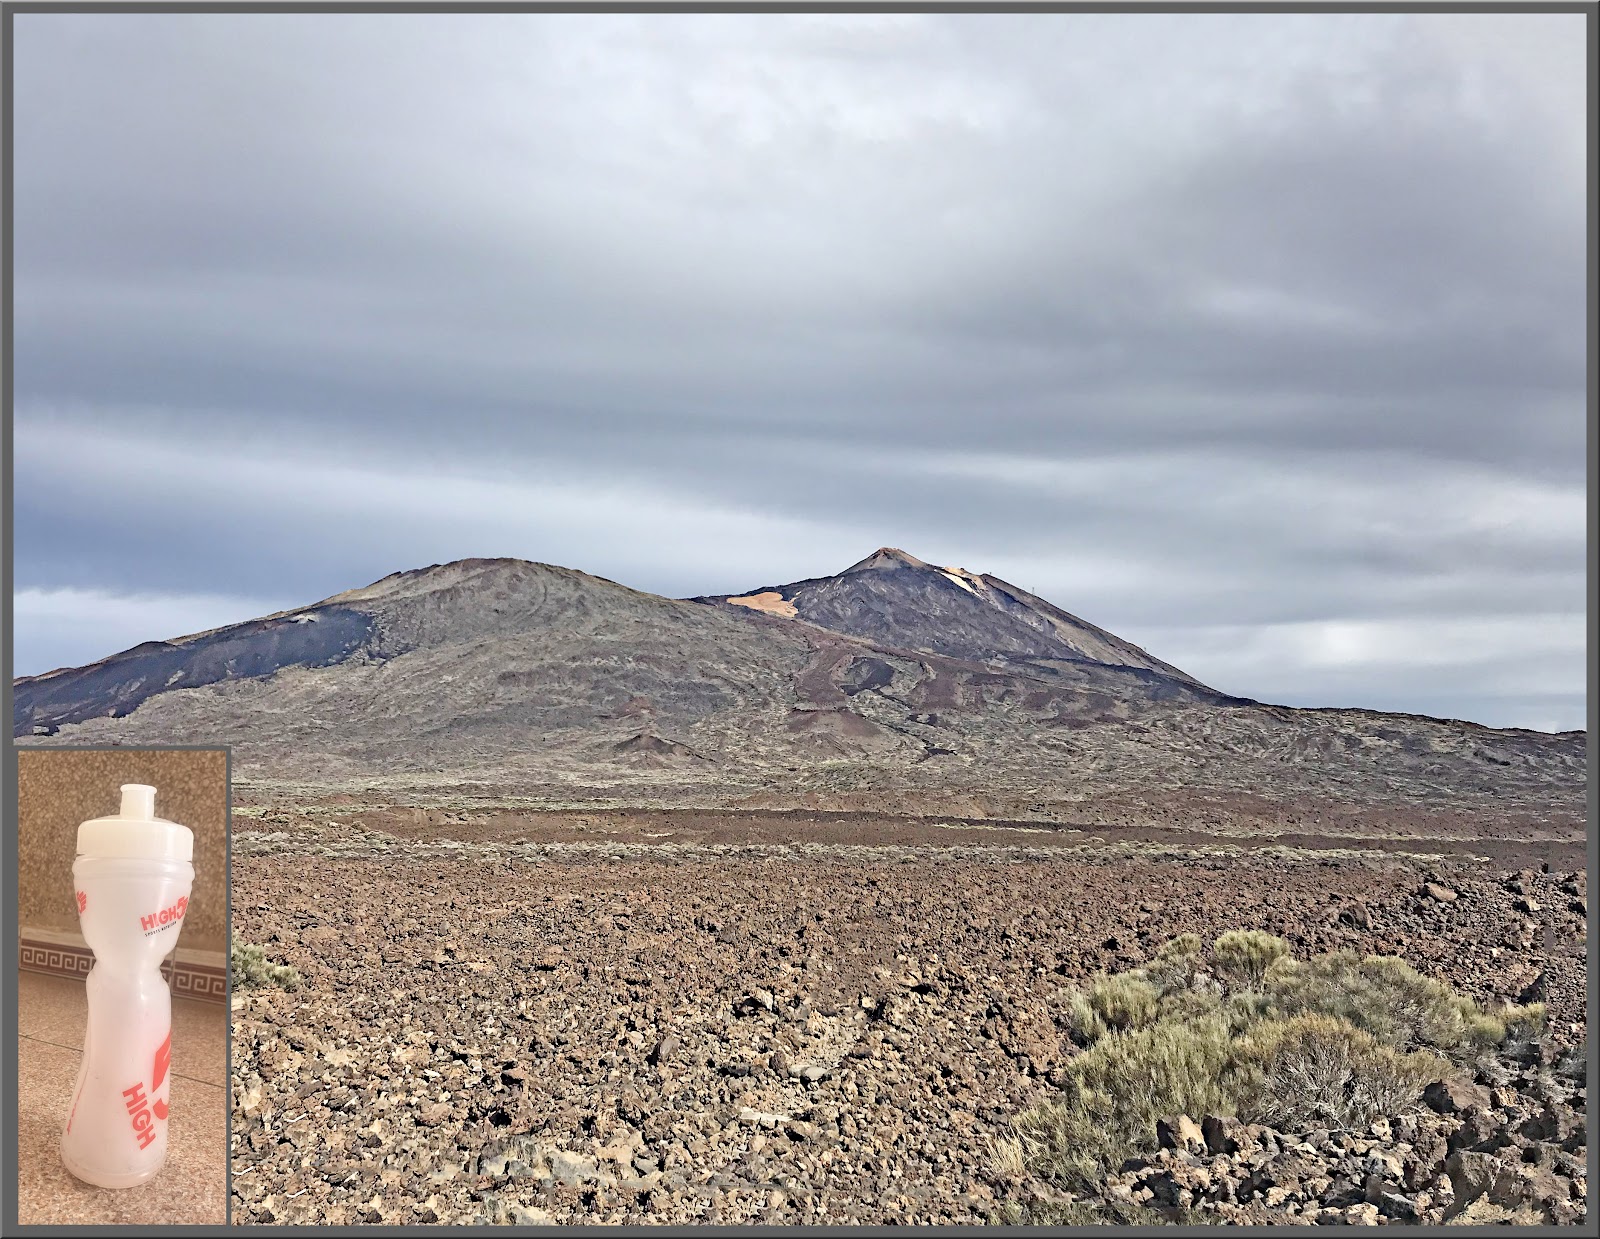 photo of desert scrub brush landscape with Mt. Teide in background, inset in corner is a picture of a water bottle collapsed from the altitude